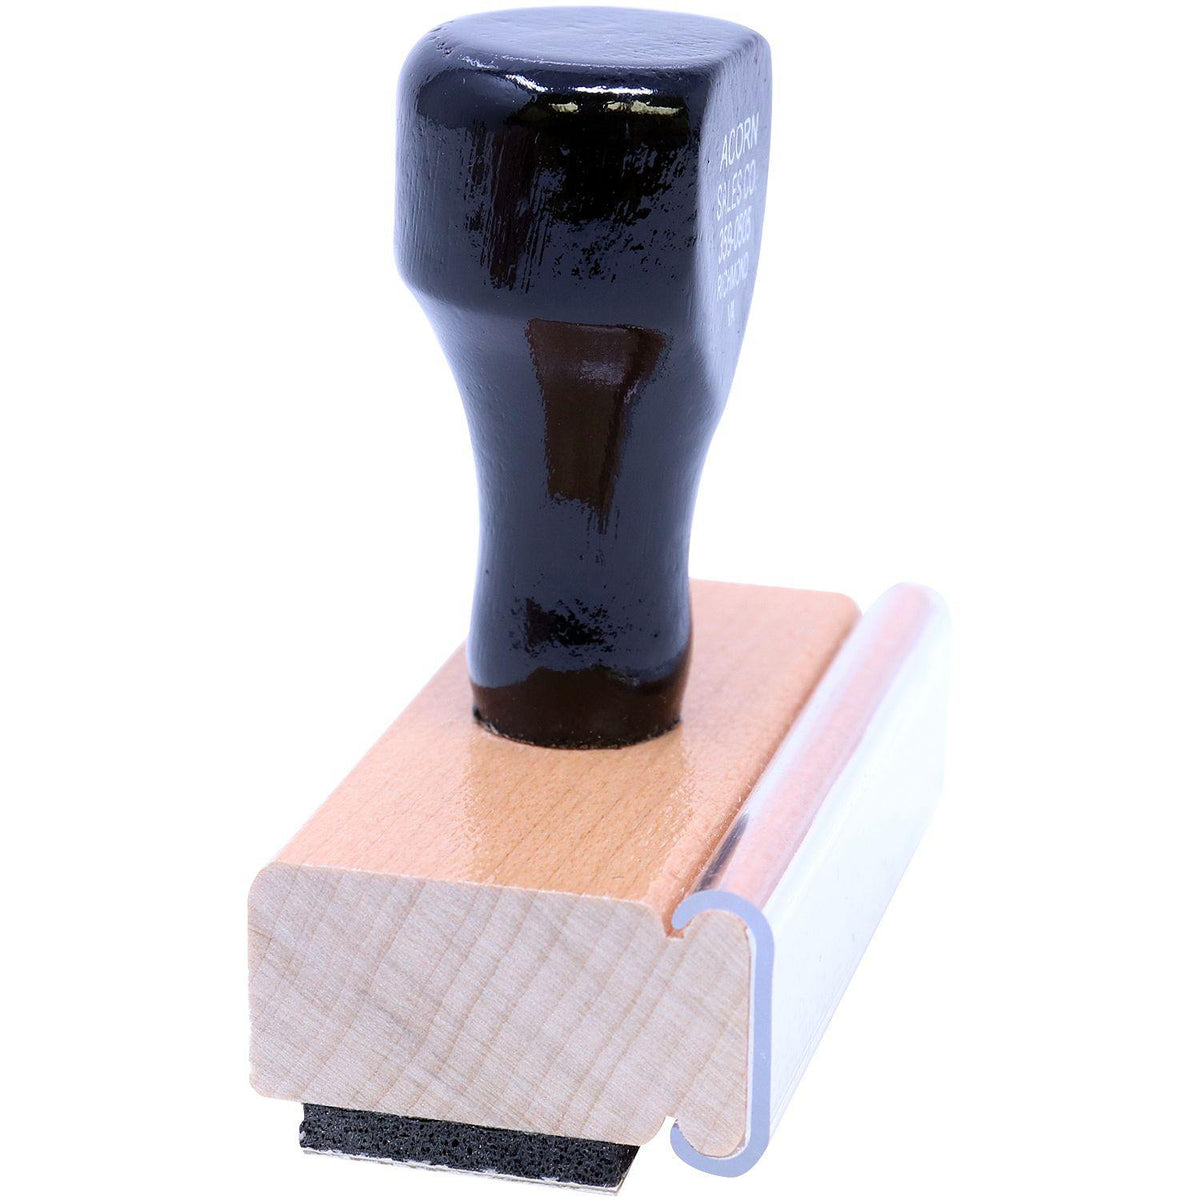 Pregnant Rubber Stamp - Engineer Seal Stamps - Brand_Acorn, Impression Size_Small, Stamp Type_Regular Stamp, Type of Use_Medical Office